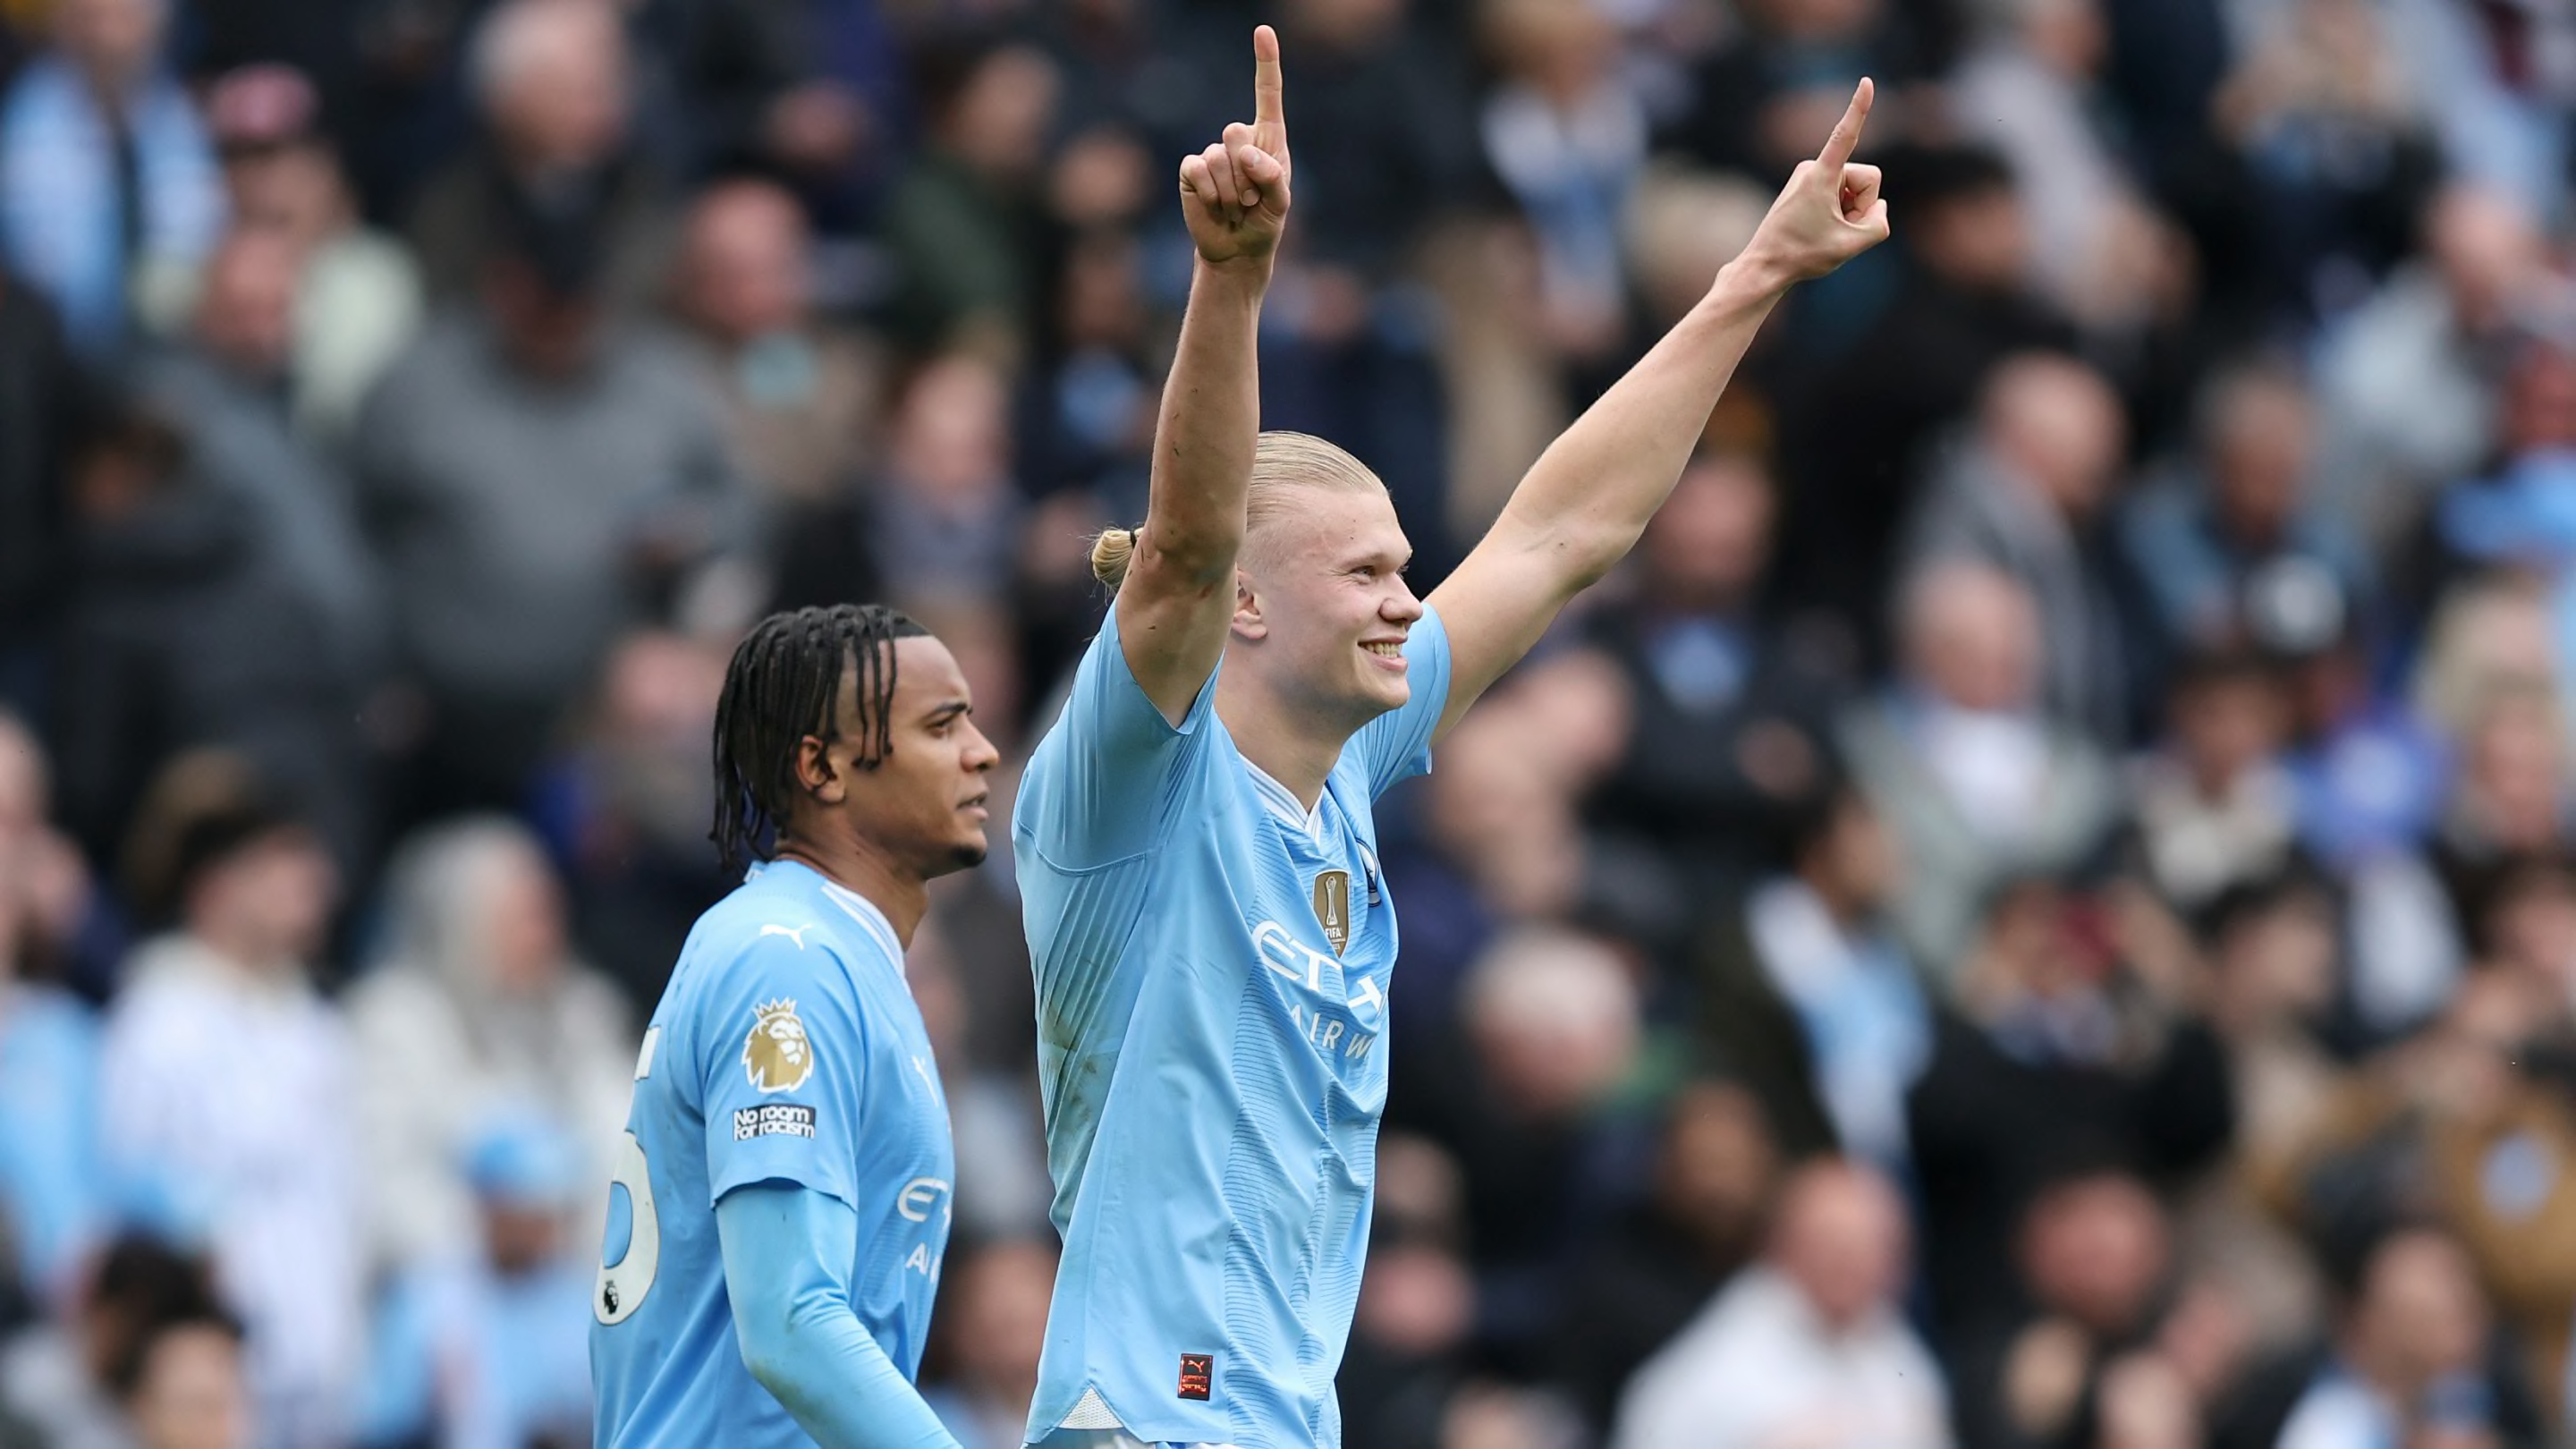 Man City 5-1 Wolves: Player ratings as Haaland scores four to send title message